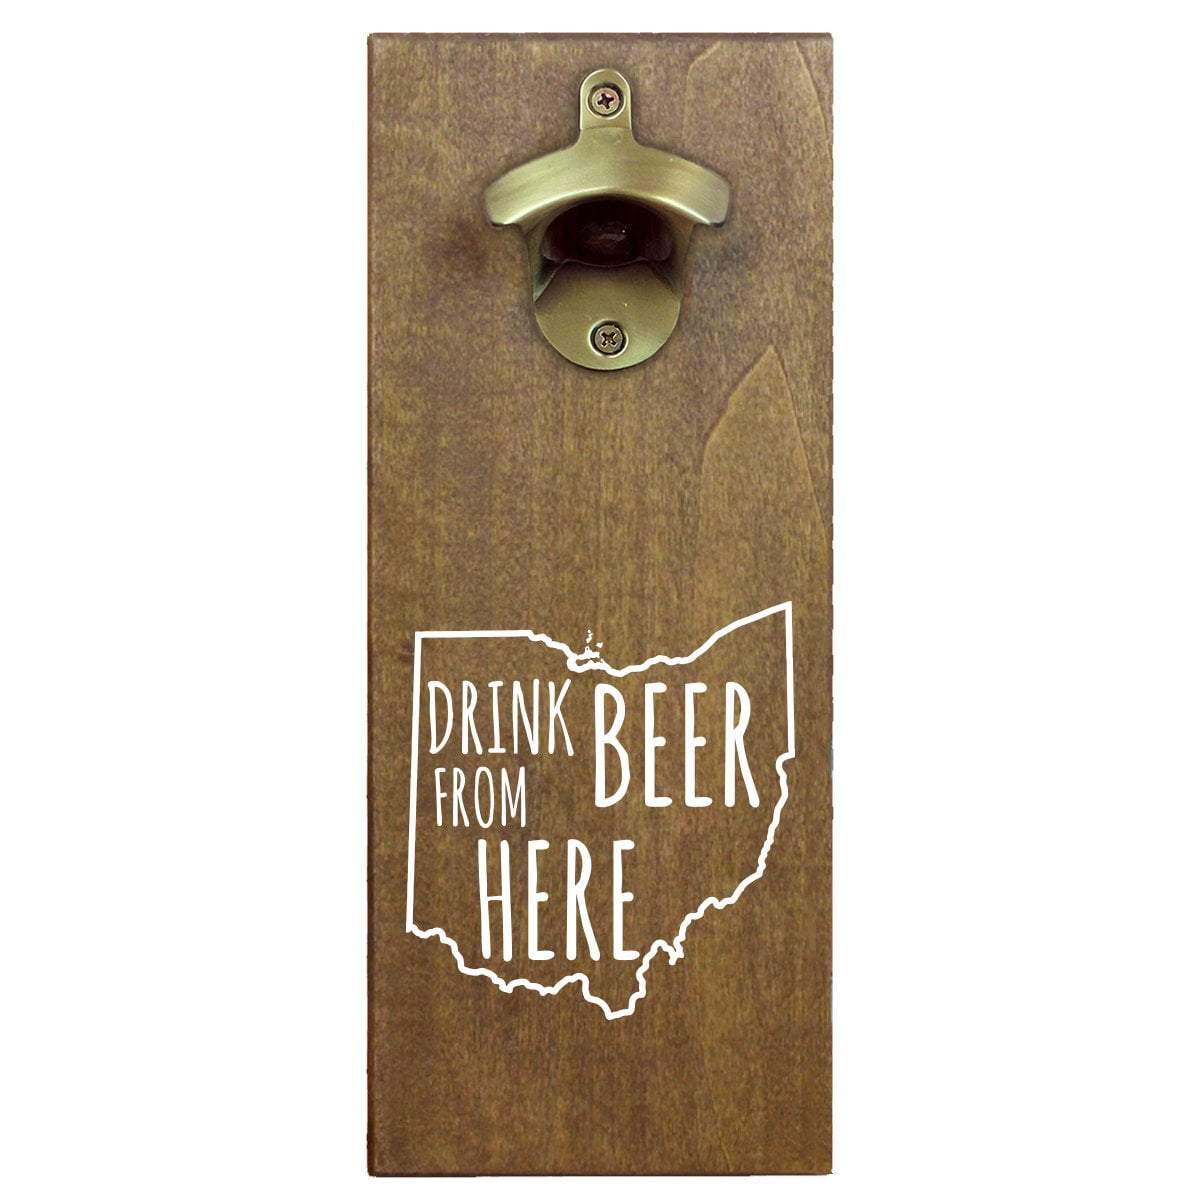 Torched Products Bottle Opener Ohio Drink Beer From Here Cap Catching Magnetic Bottle Opener